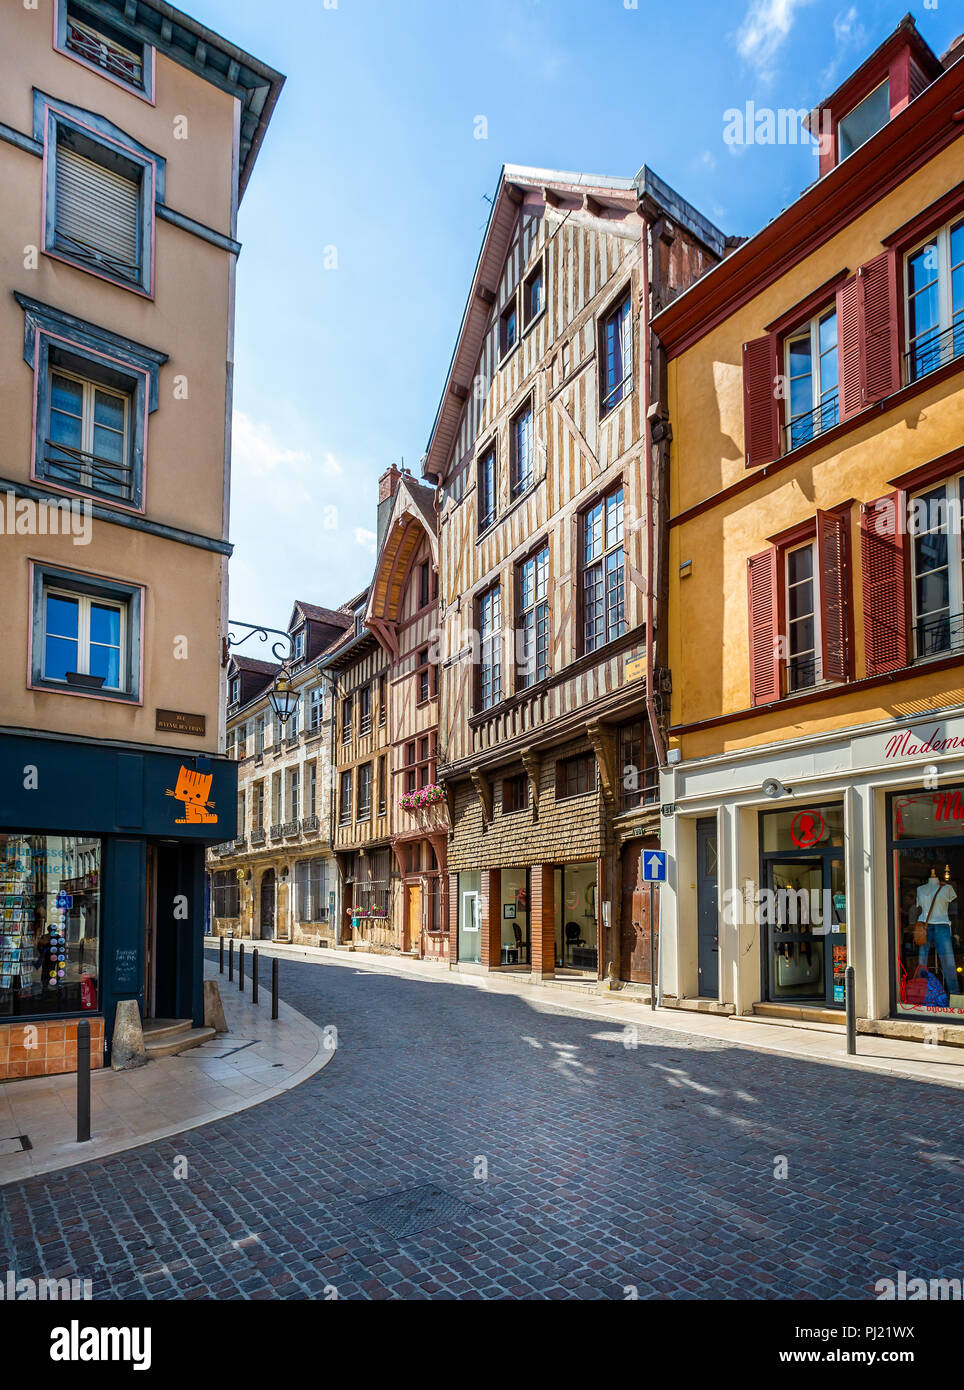 Historic centre of Troyes with half timbered buildings in Troyes, Aube, France on 31 August 2018 Stock Photo